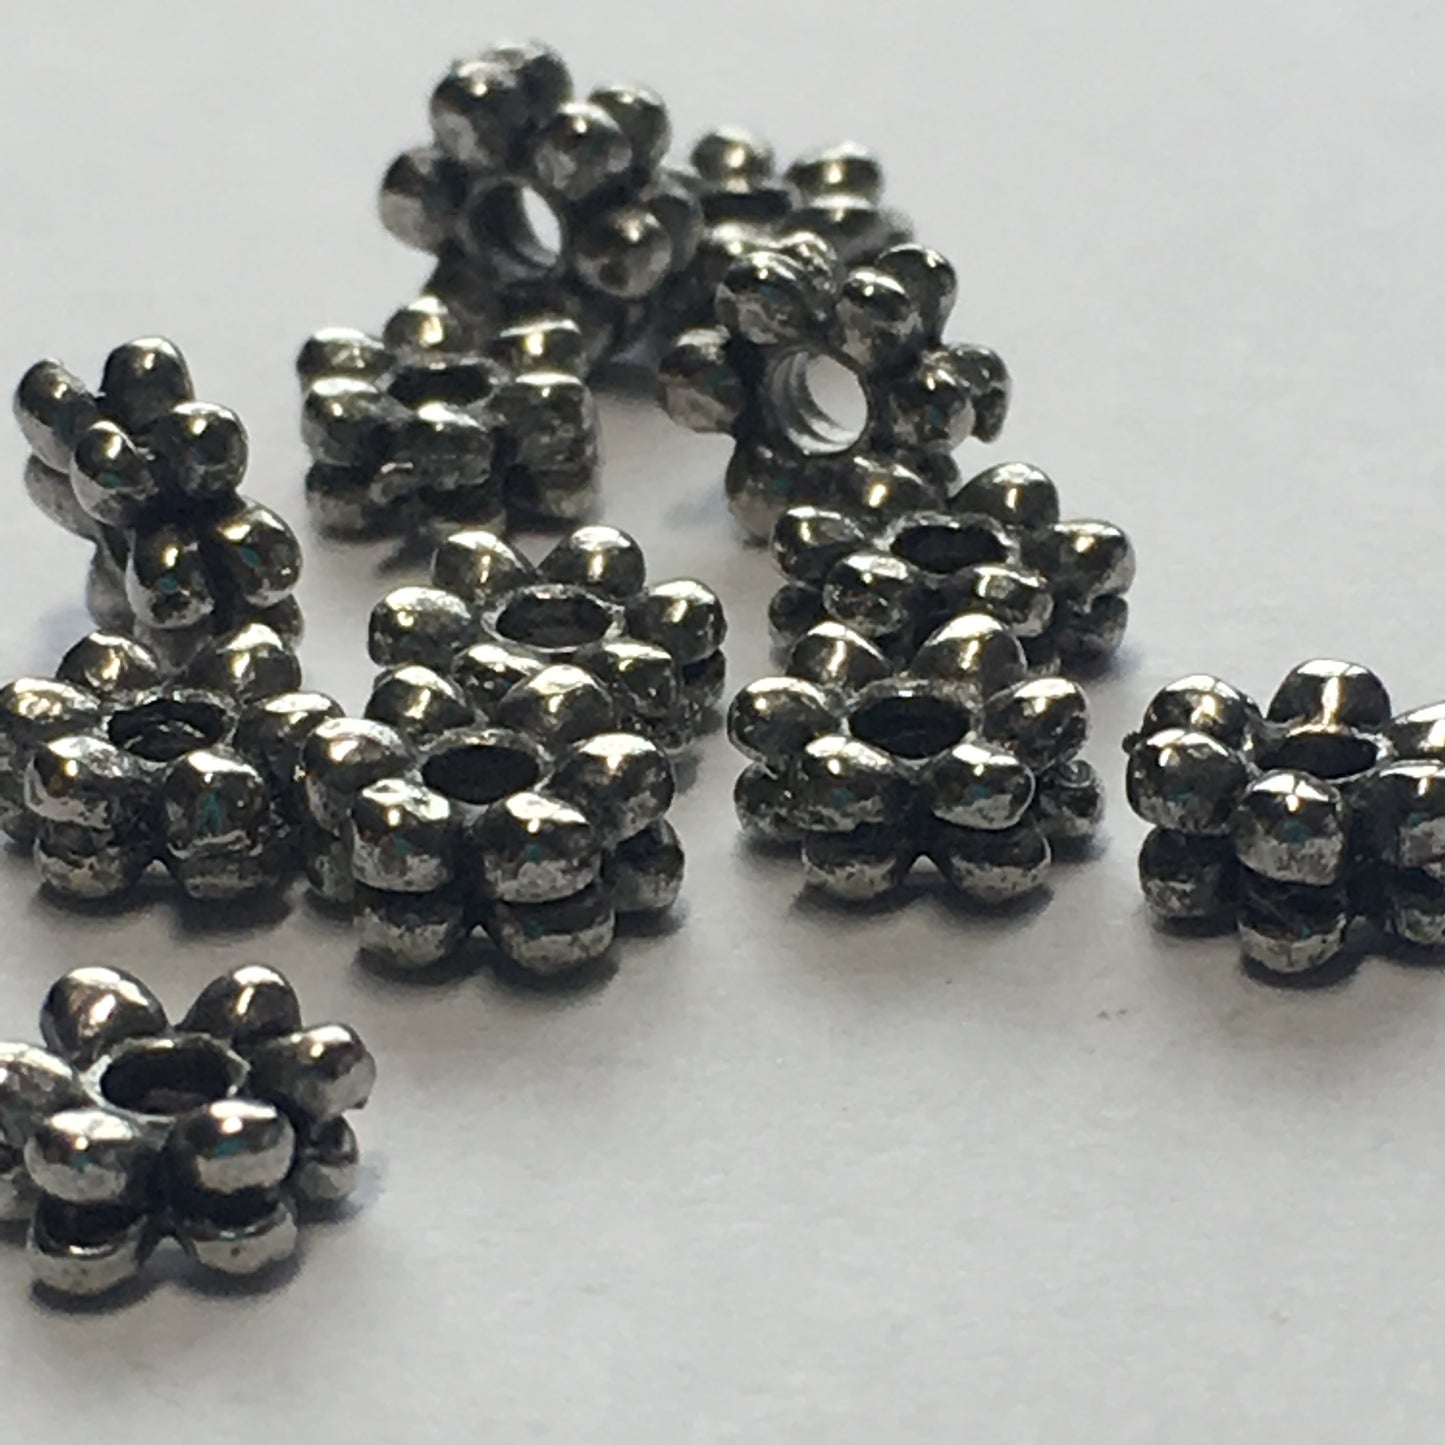 Antique Silver Daisy Spacer Beads, 7 x 2 mm - 12 Beads